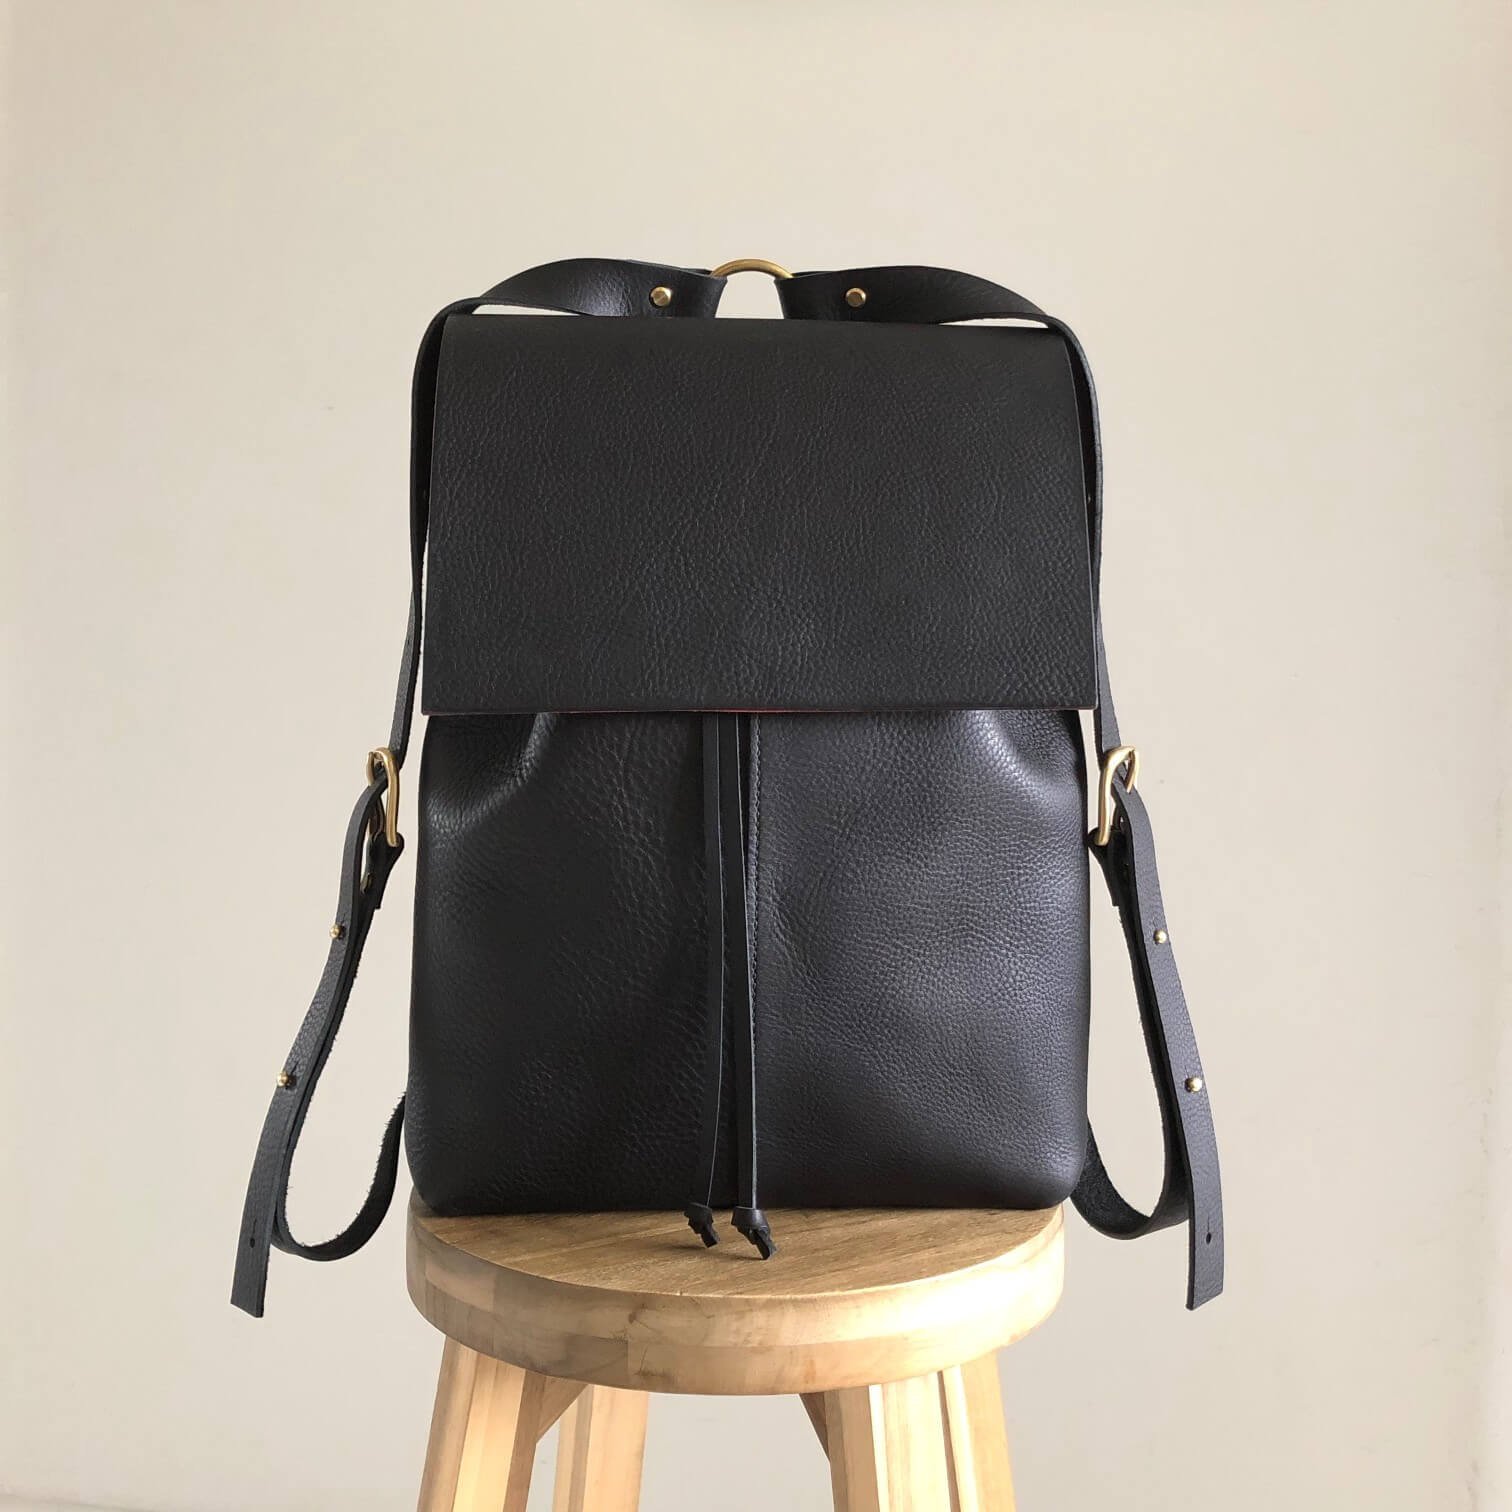 CARV sustainable leather backpack handmade in the UK.